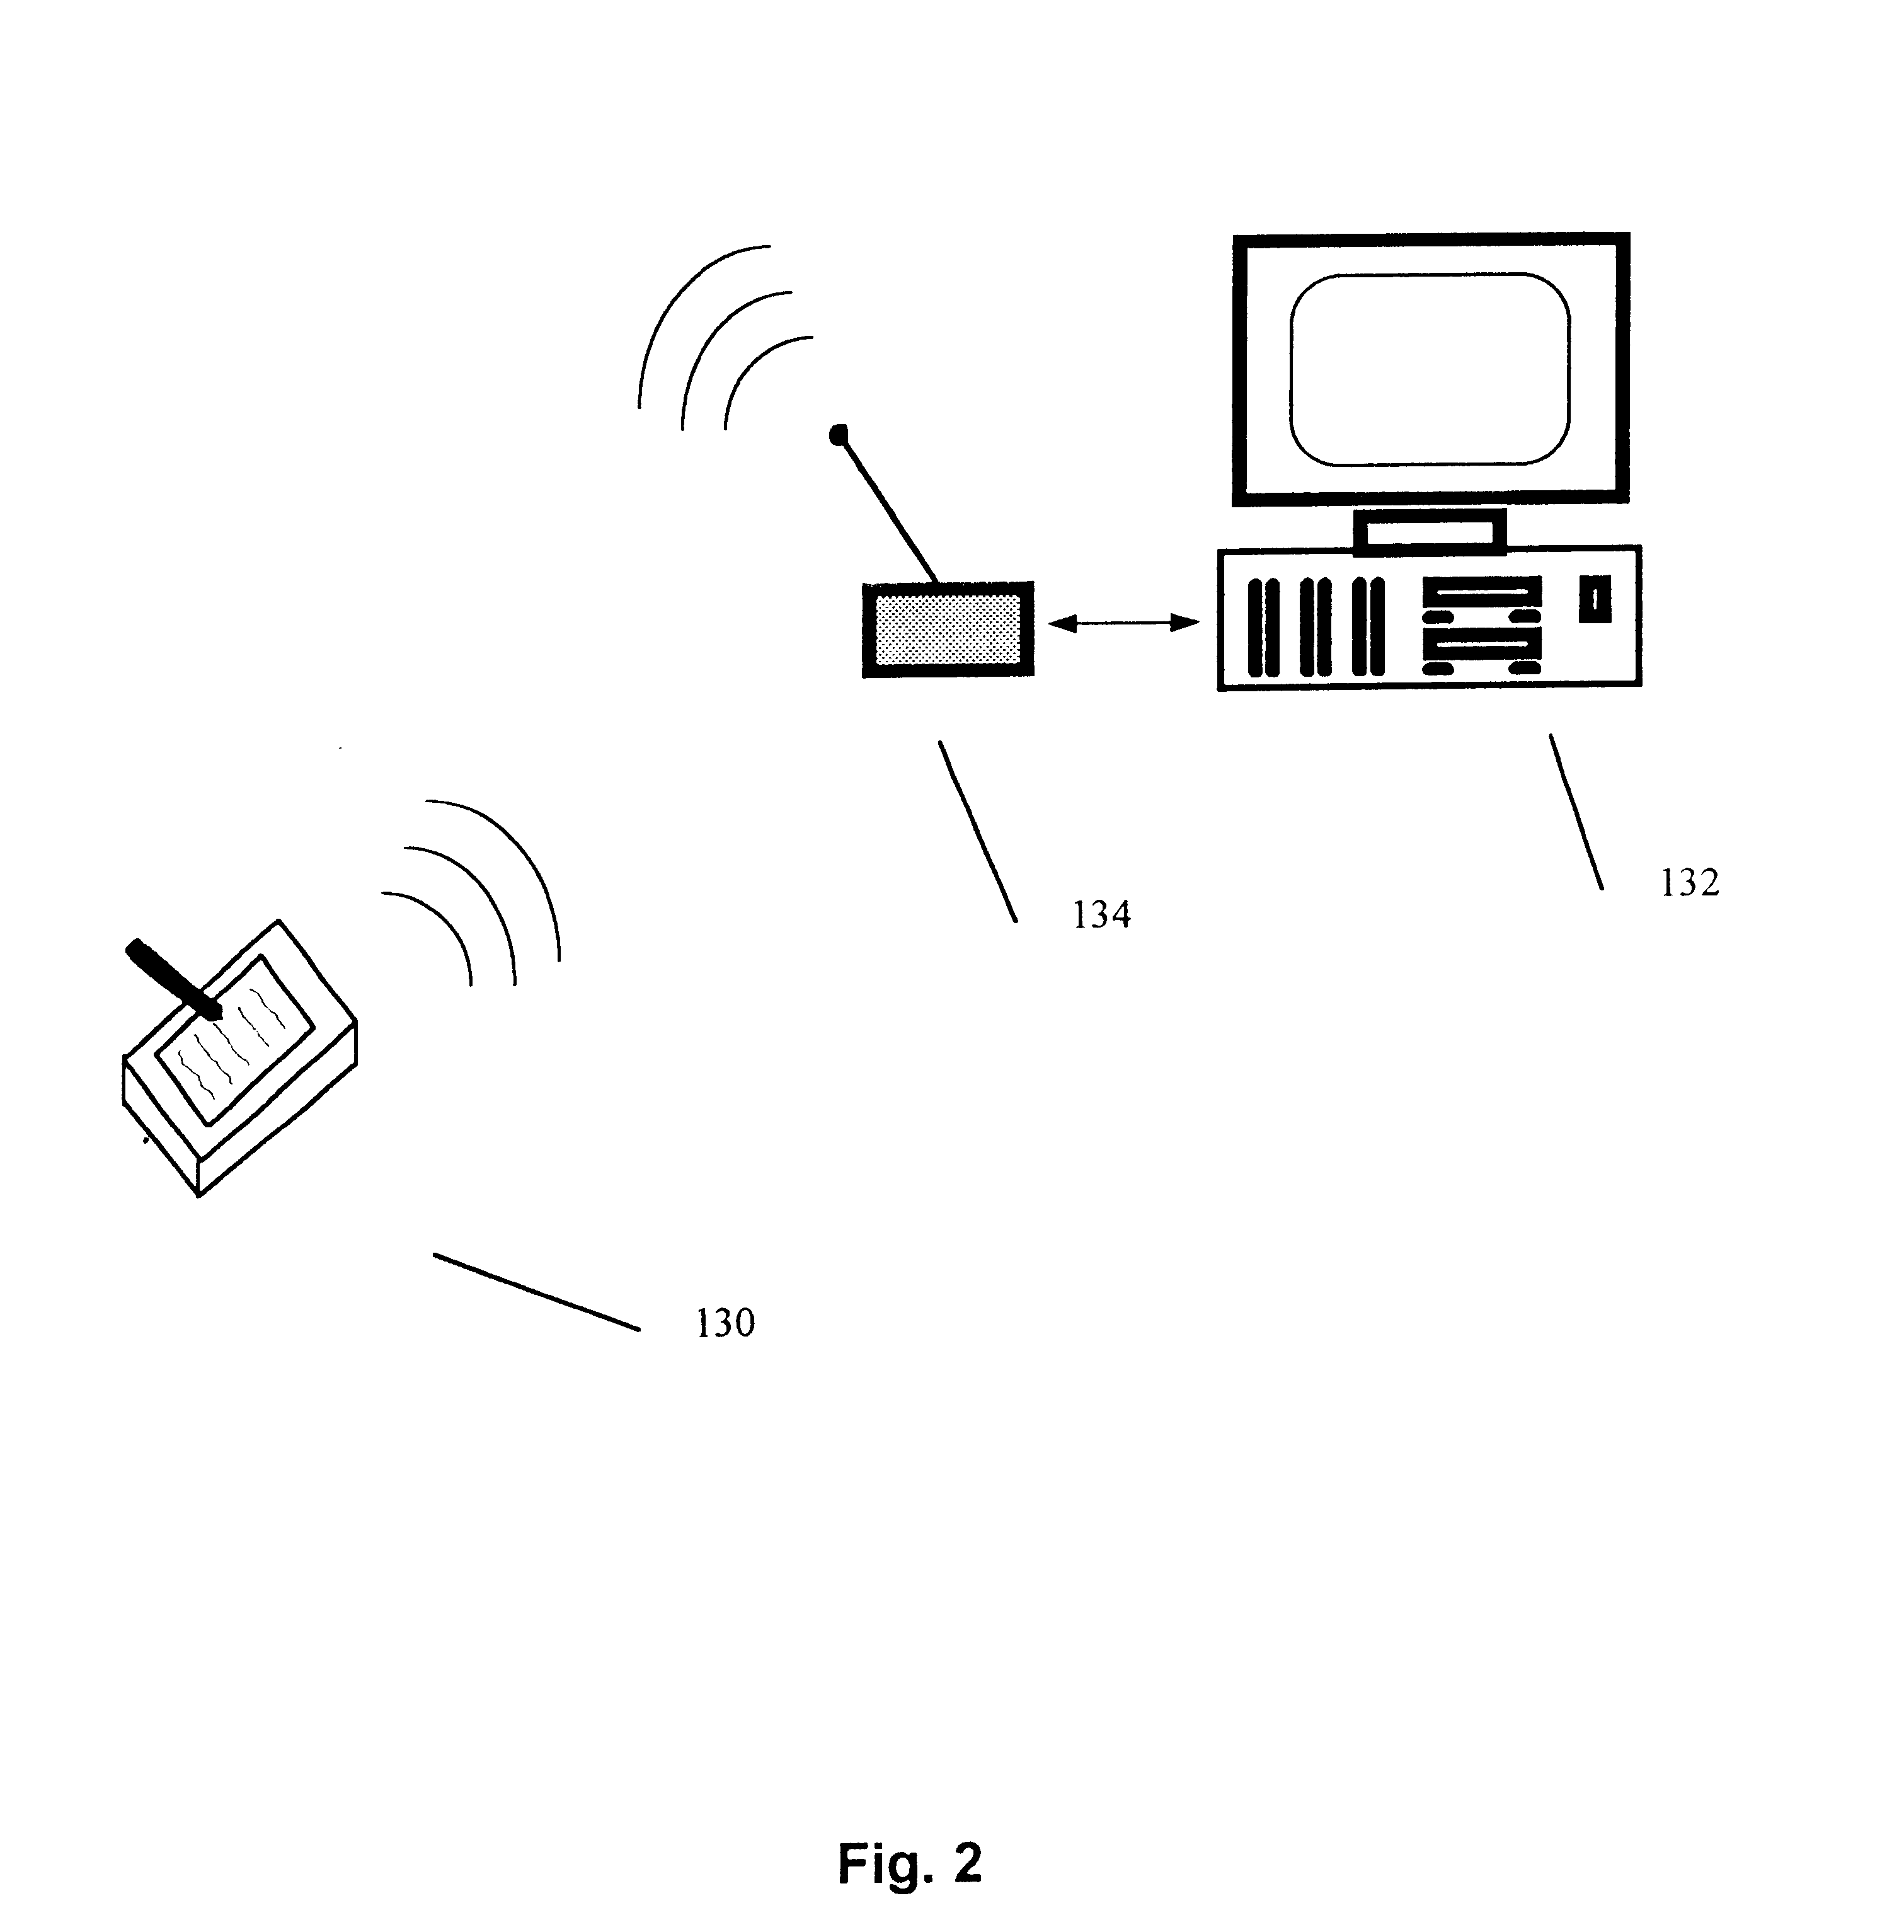 Method for production of medical records and other technical documents